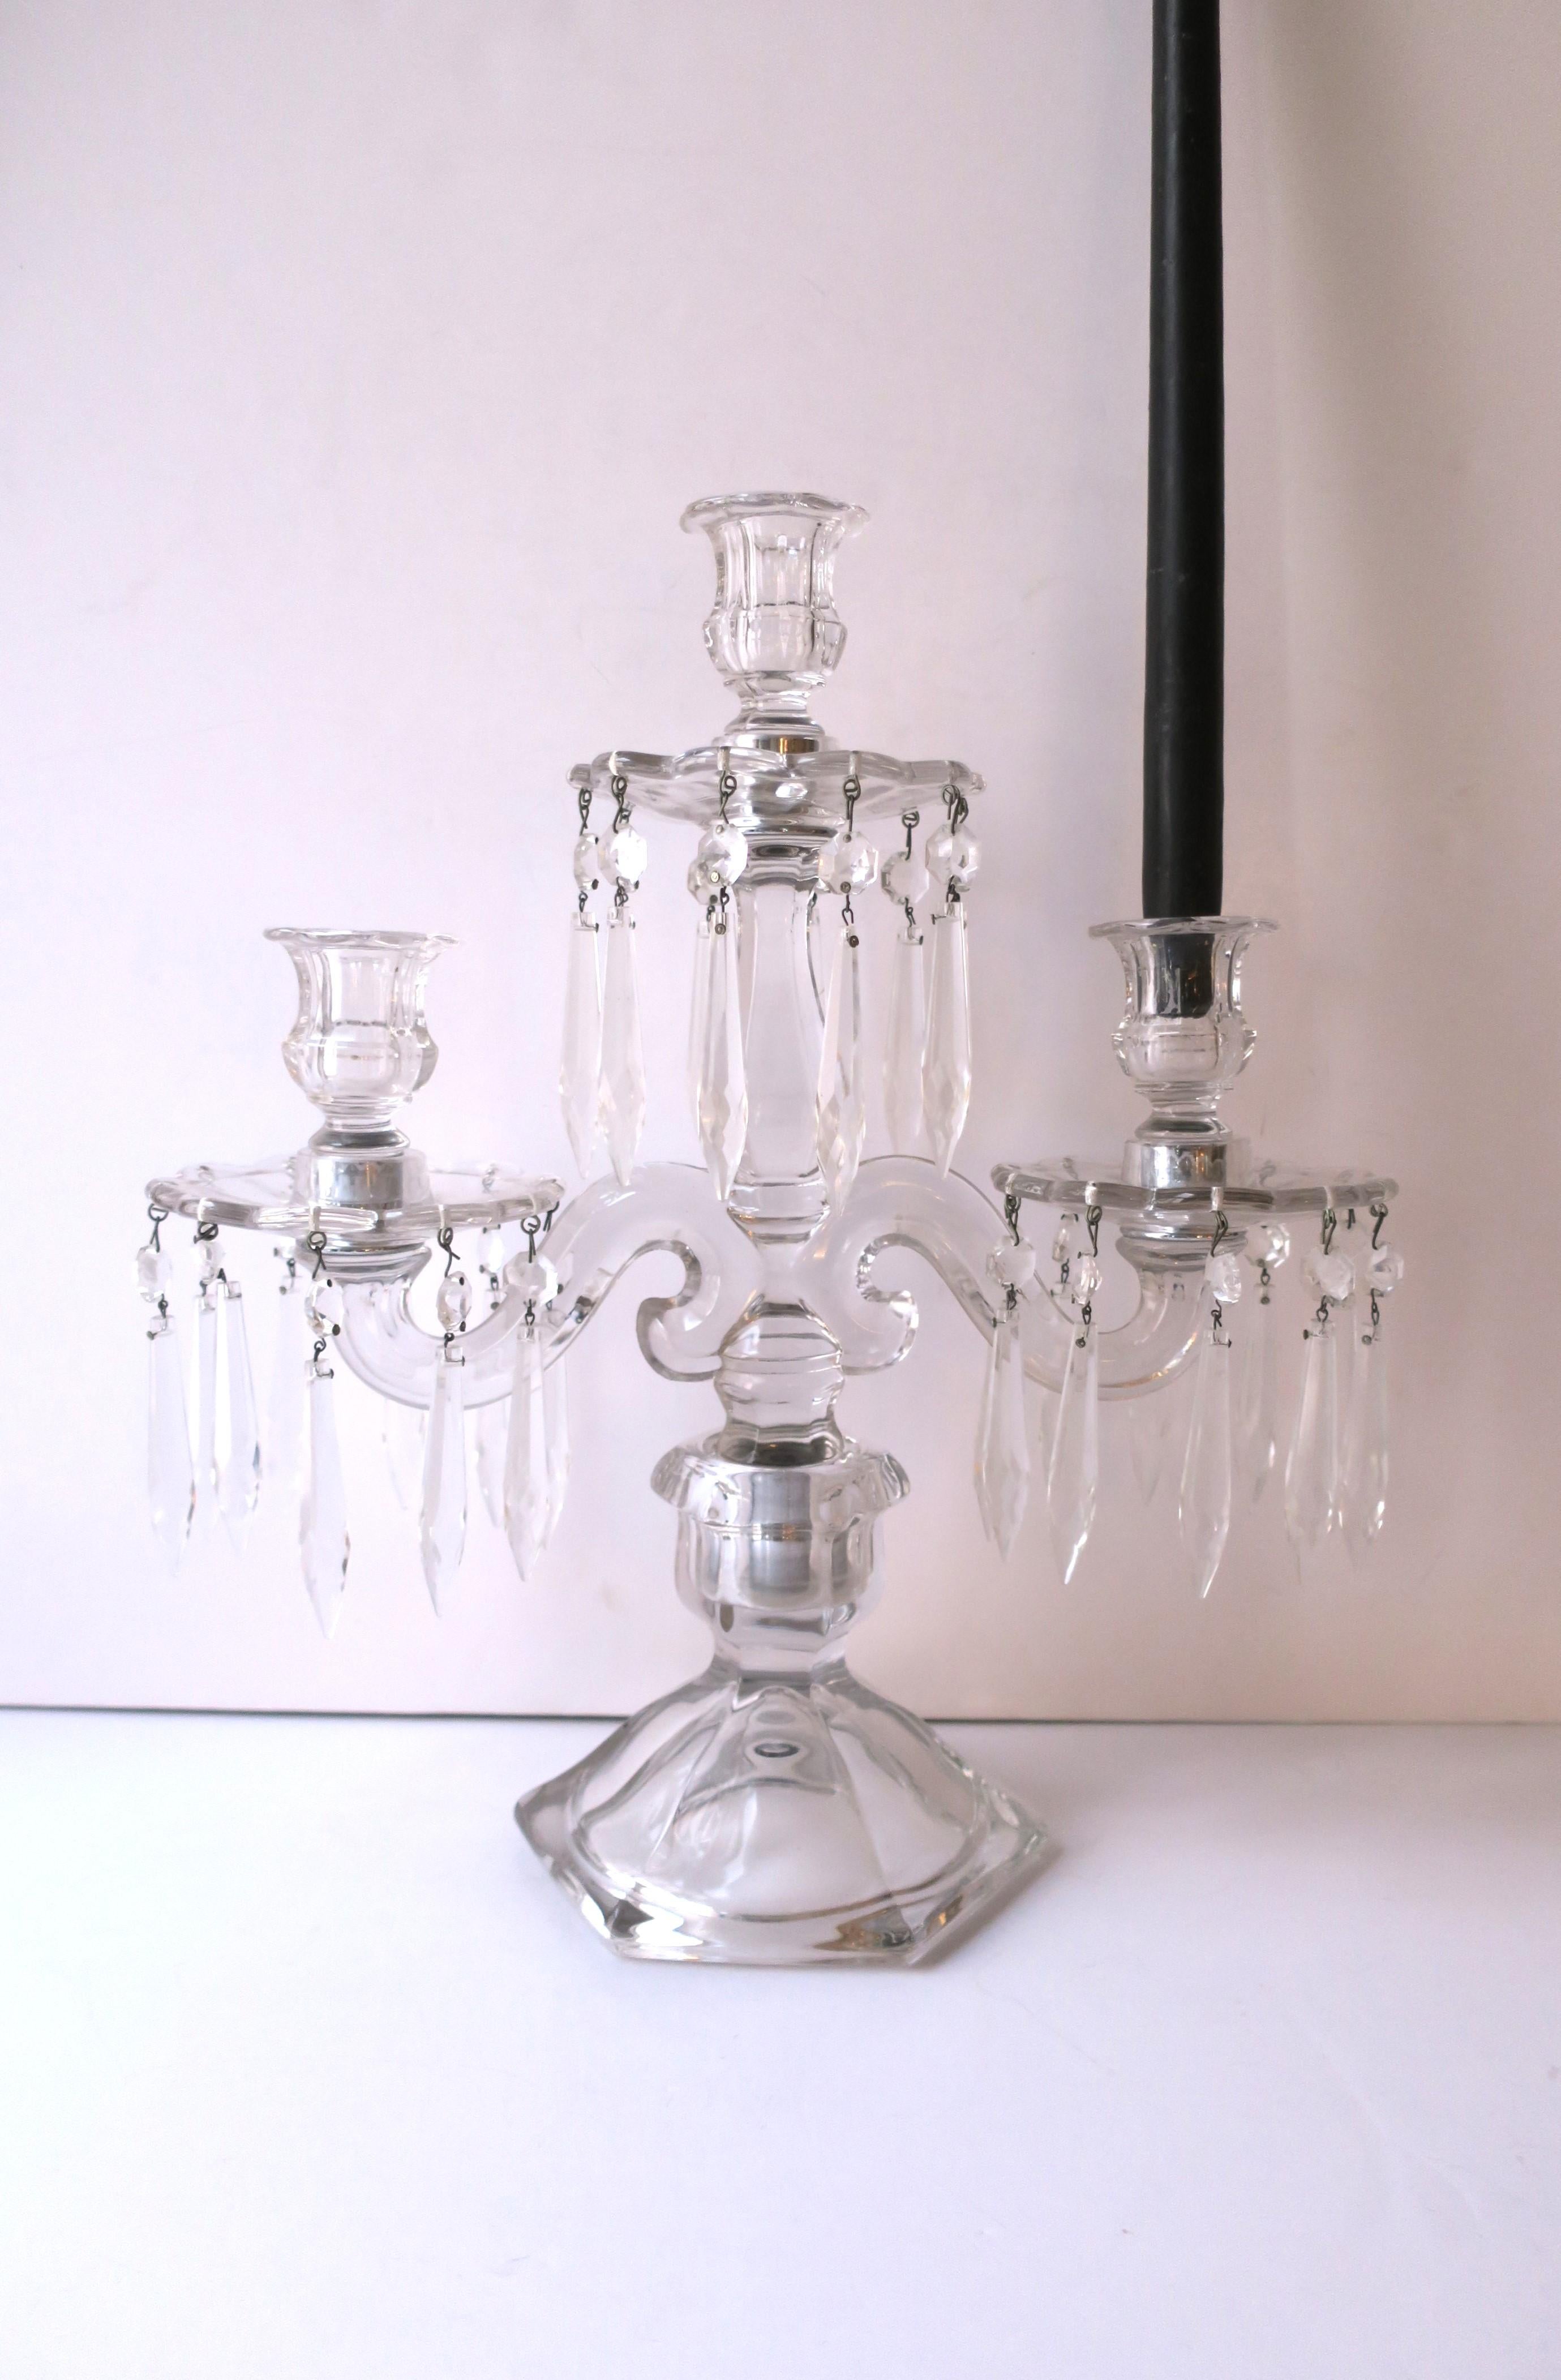 Molded Crystal and Glass Candlesticks Candelabras, Pair For Sale